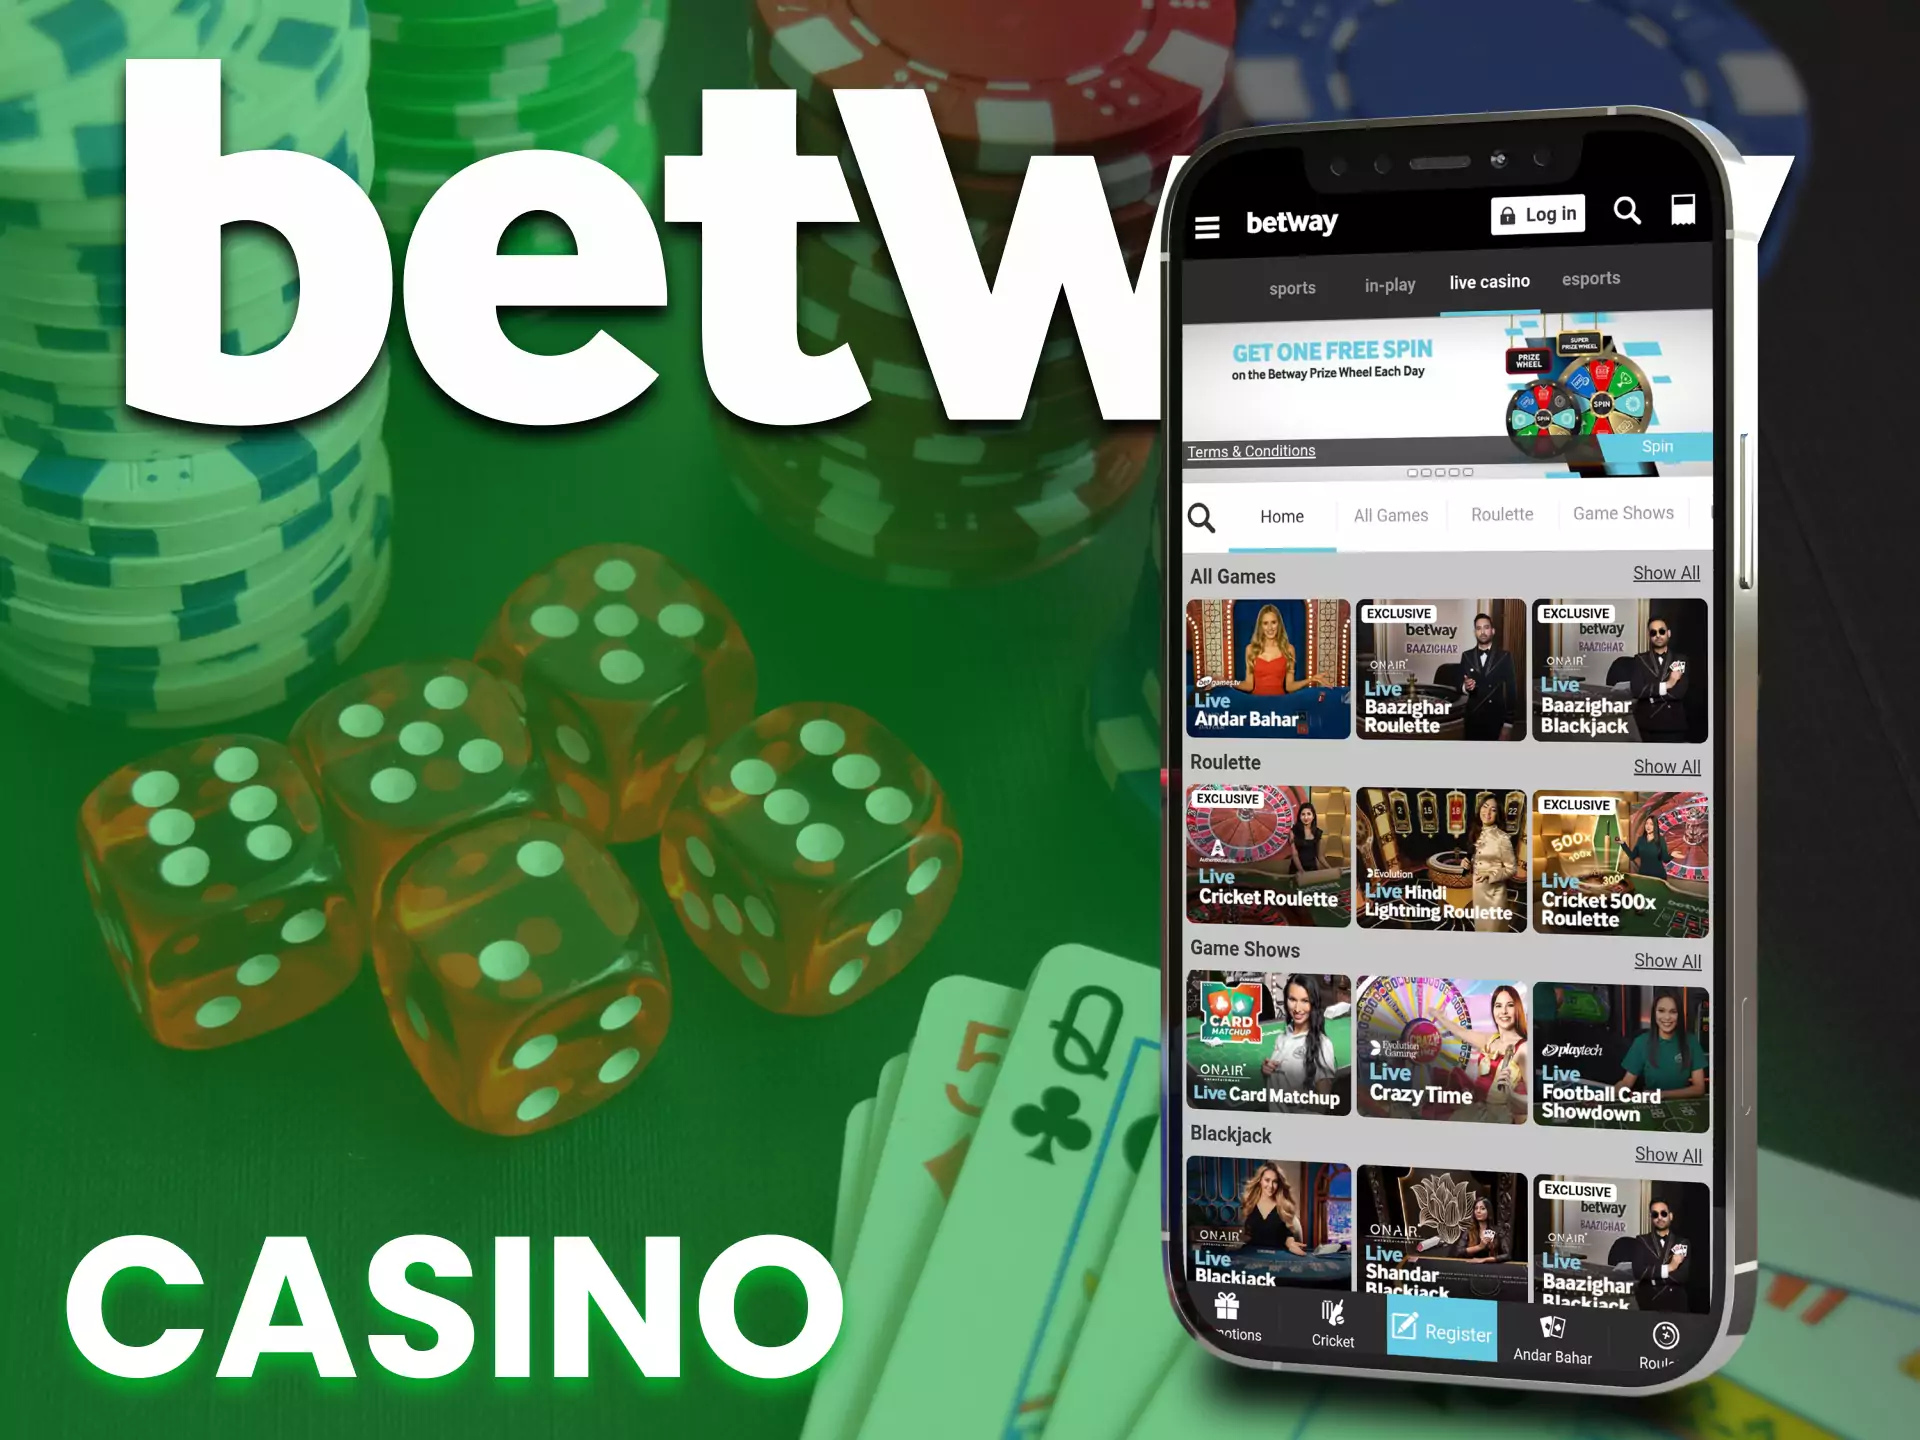 On the Betway app, play at the Casino.